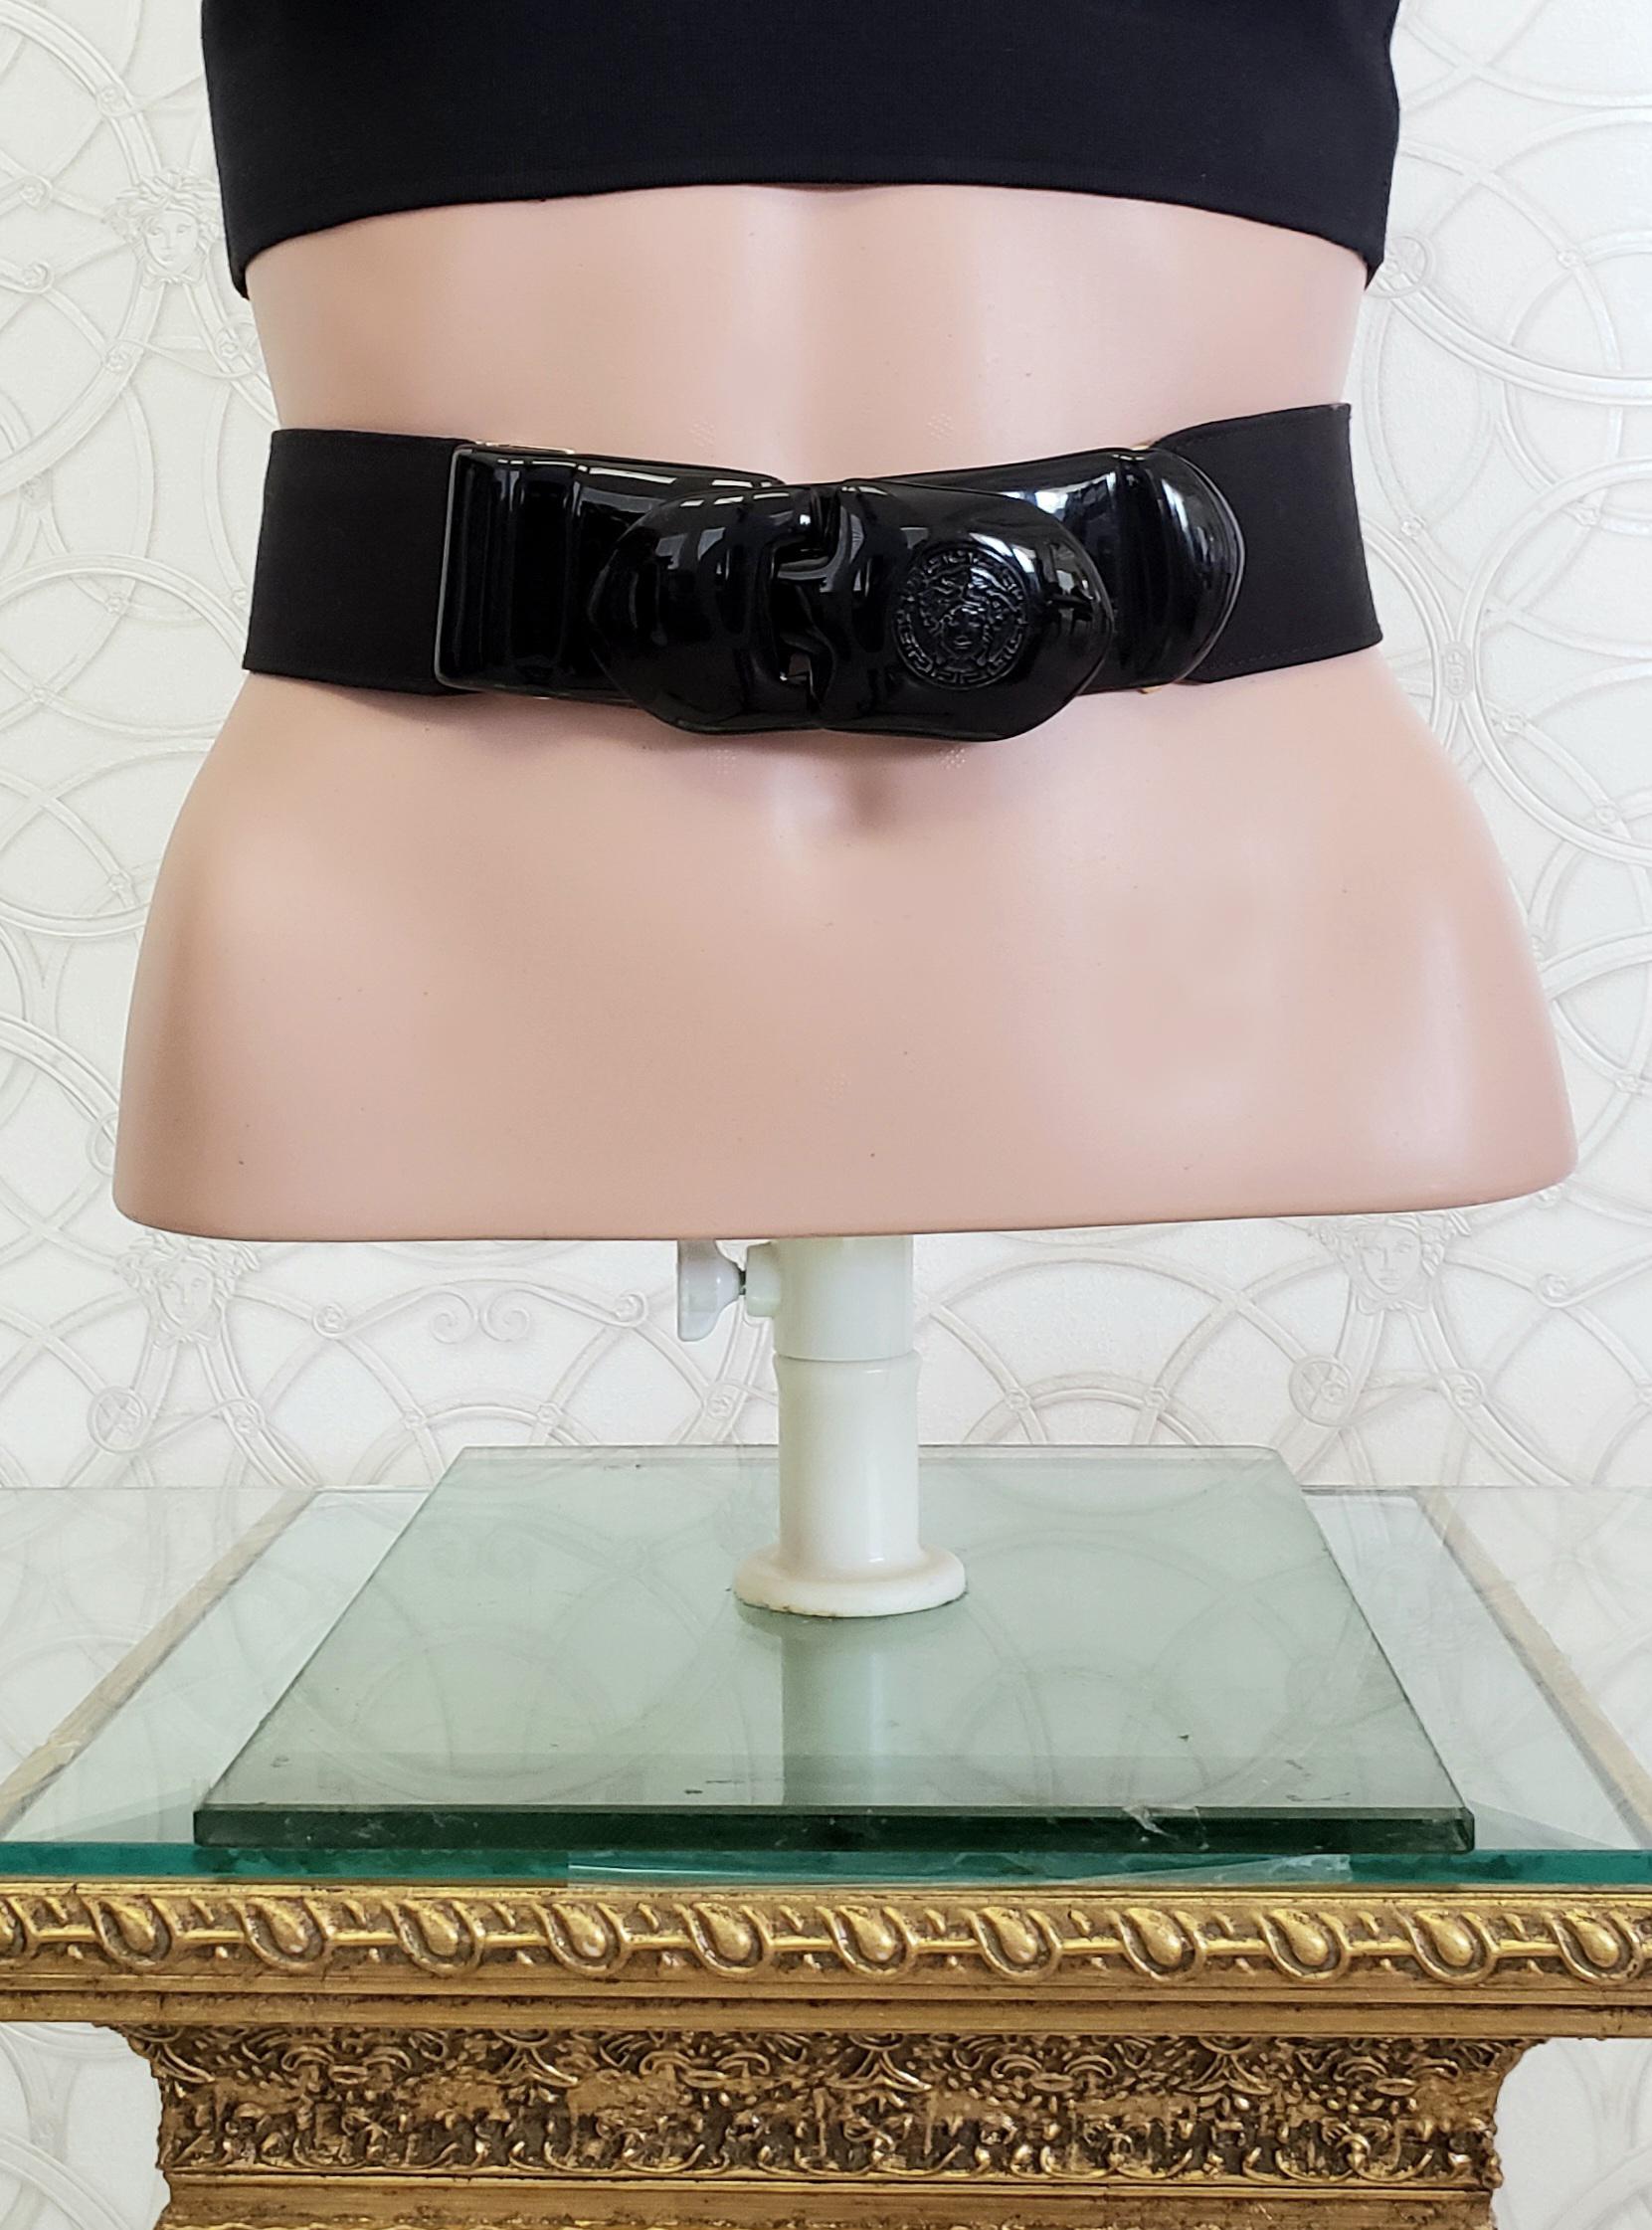 VERSACE

Black stretchy textile and leather belt
Medusa Head Plastic buckle
Gold - tone Hardware

Size 42 - 6
Wide 2